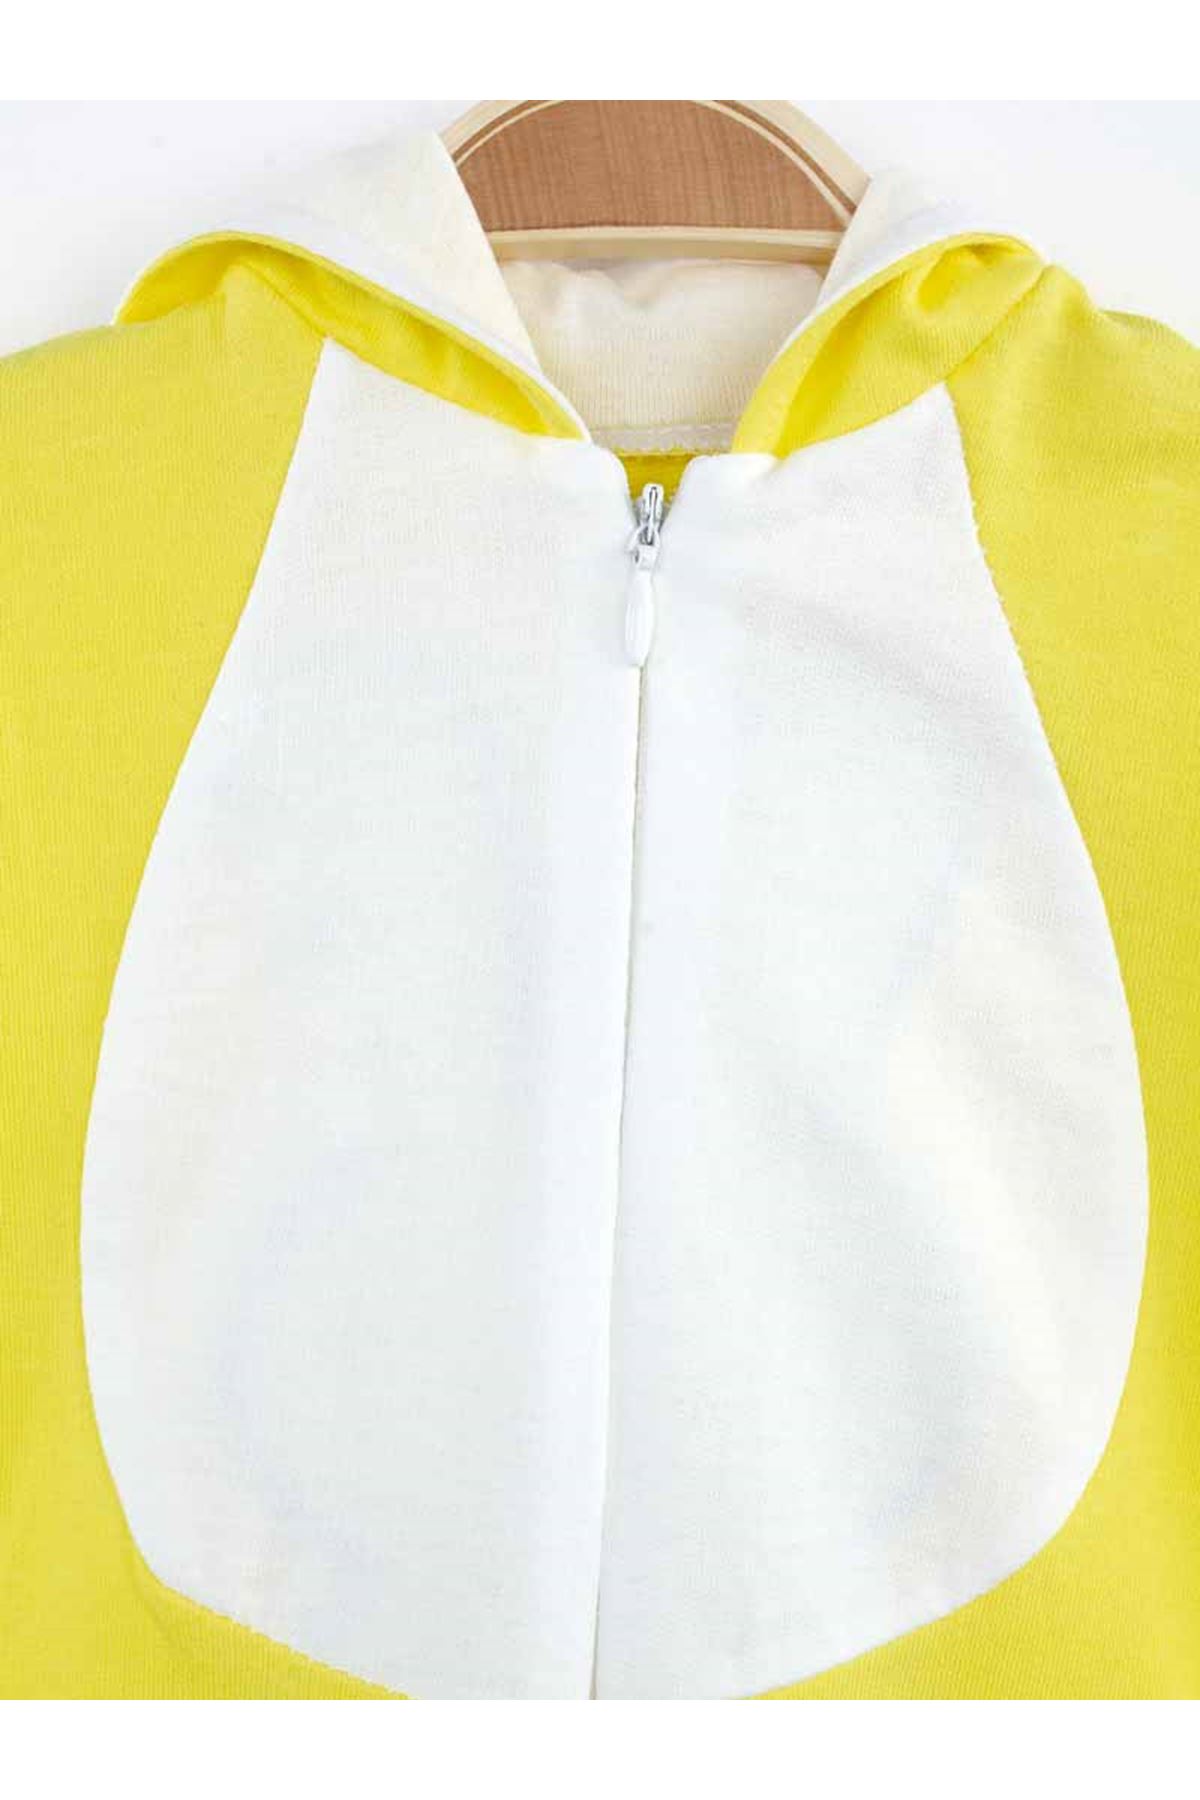 Yellow Baby Rompers for Girls Boys Babies Cute Rabbit Animal Figured Clothing Soft cotton Spring Outfit Patterns Models